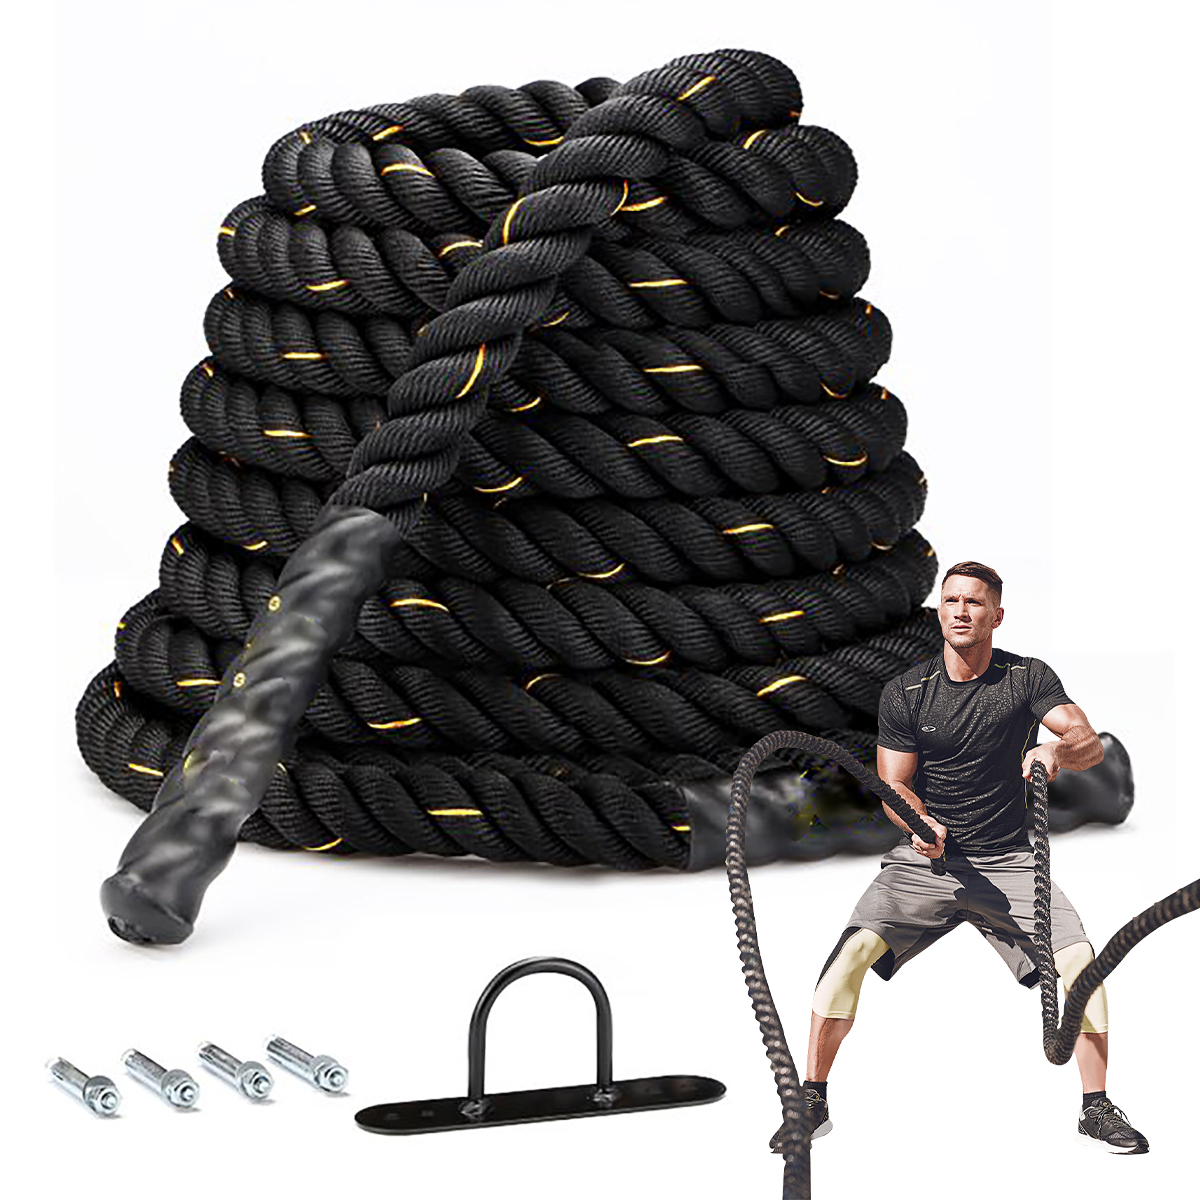 1.5inch Heavy Exercise Training Rope 30ft Length,Heavy Battle Rope for Strength Training - image 1 of 9